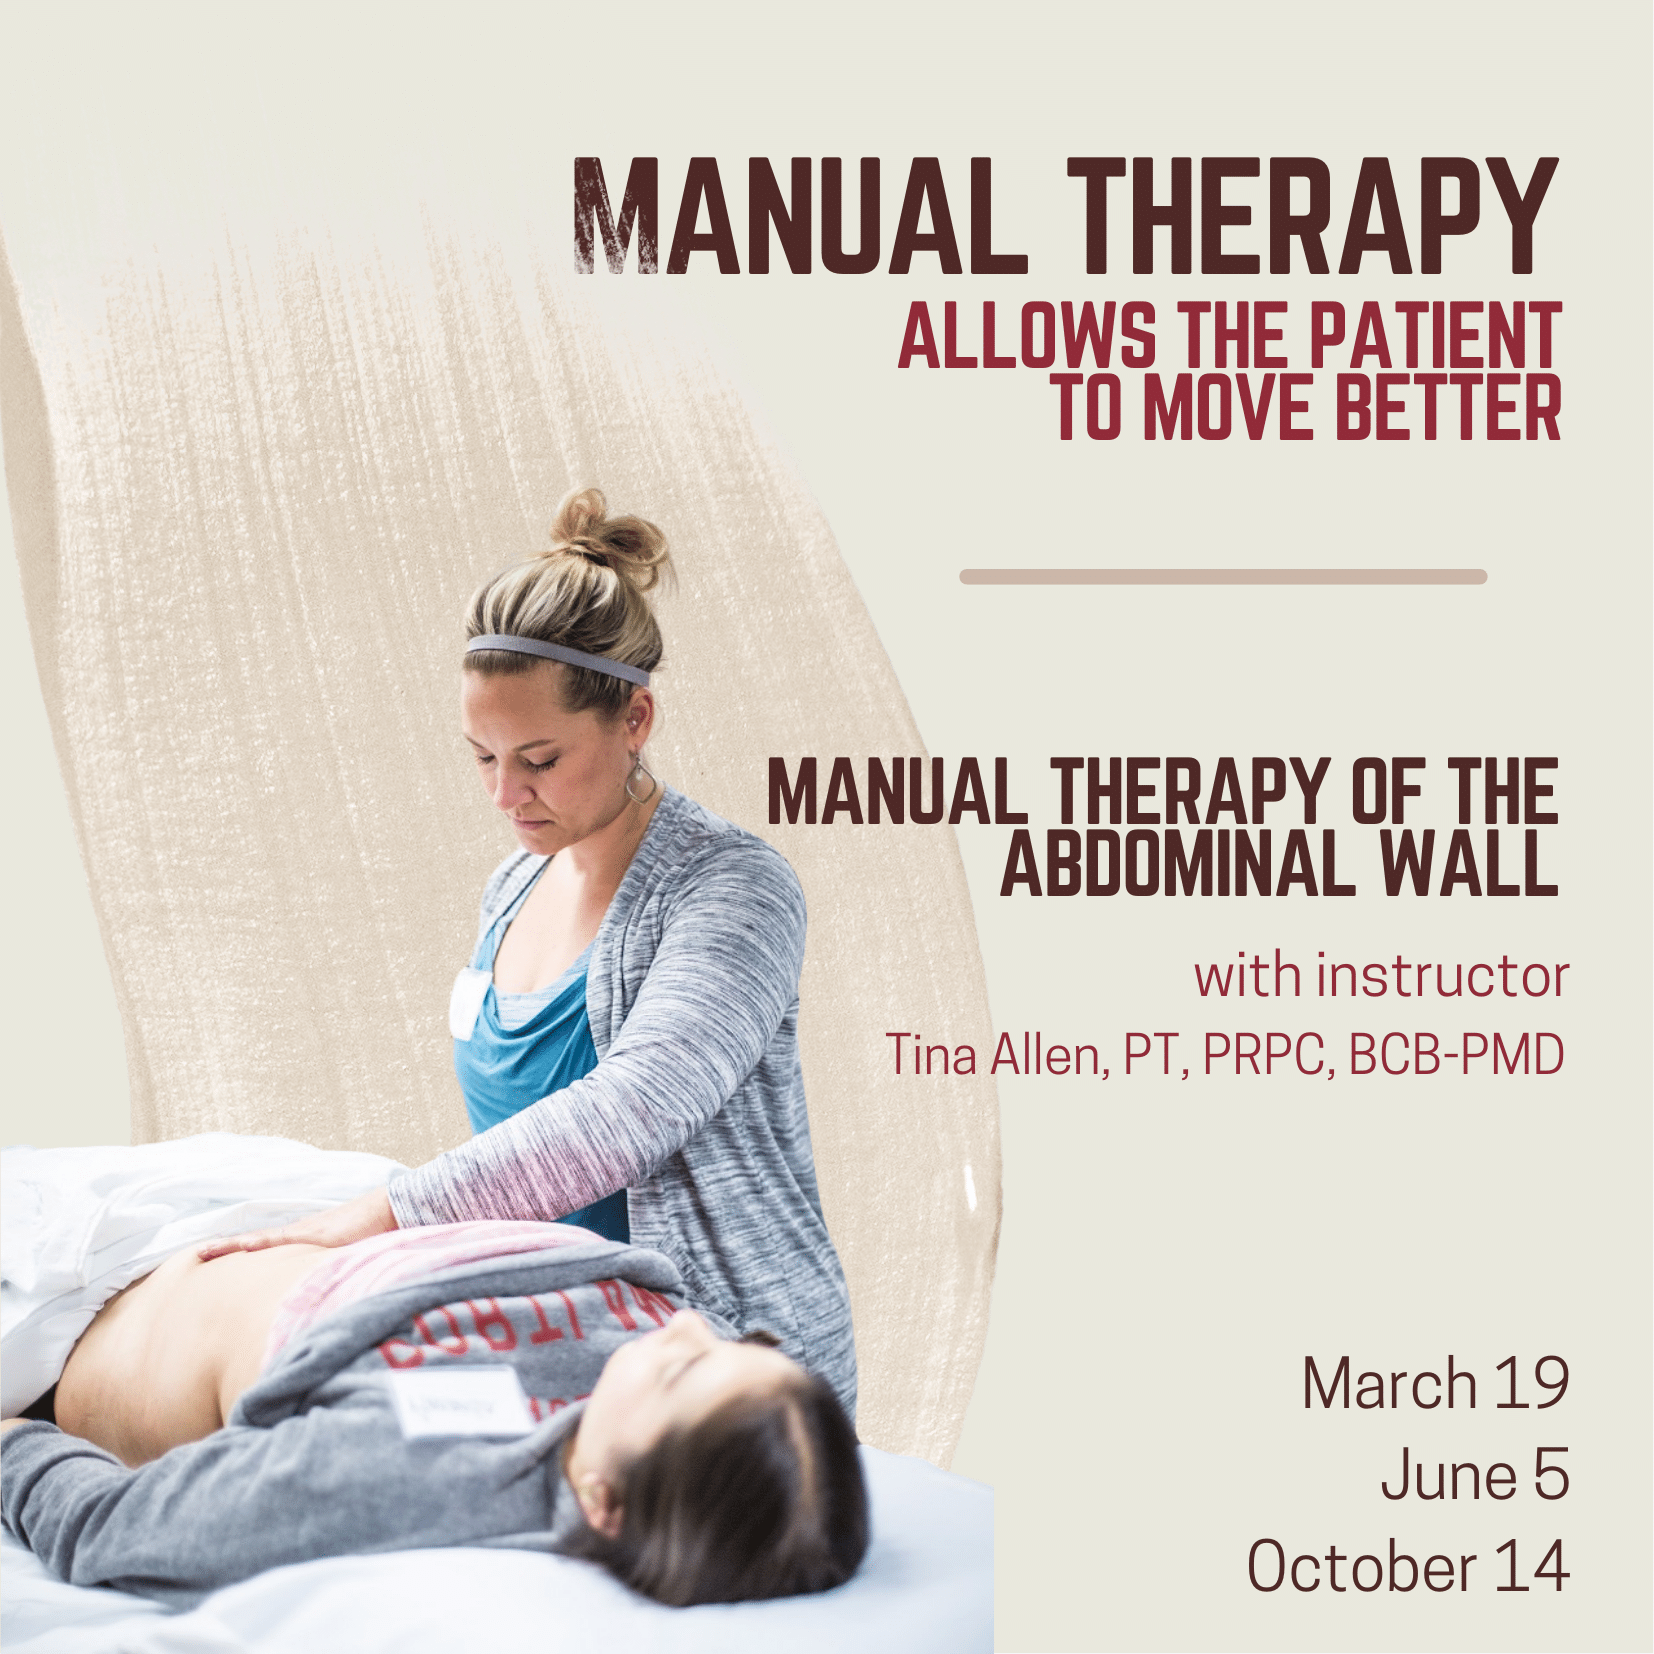 Manual Therapy Allows the Patient to Move Better